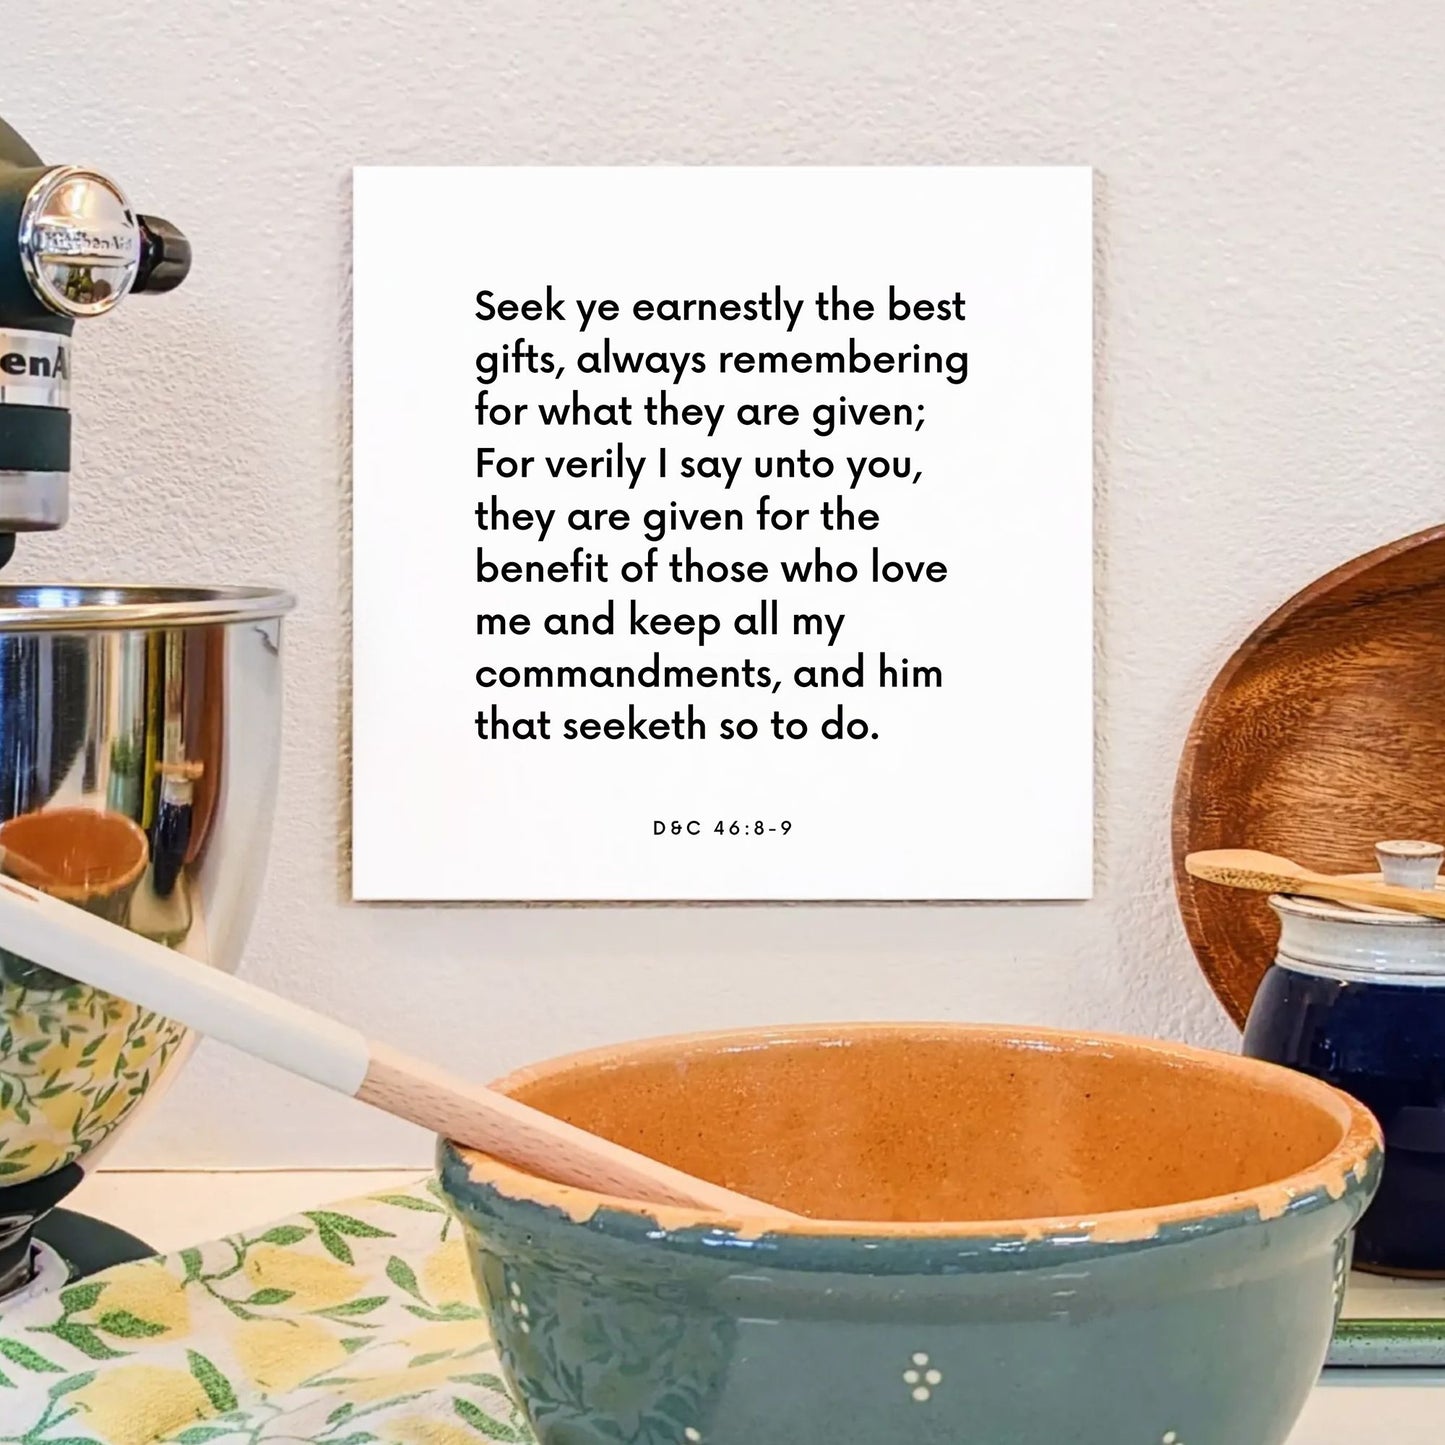 Kitchen mouting of the scripture tile for D&C 46:8-9 - "Seek ye earnestly the best gifts"